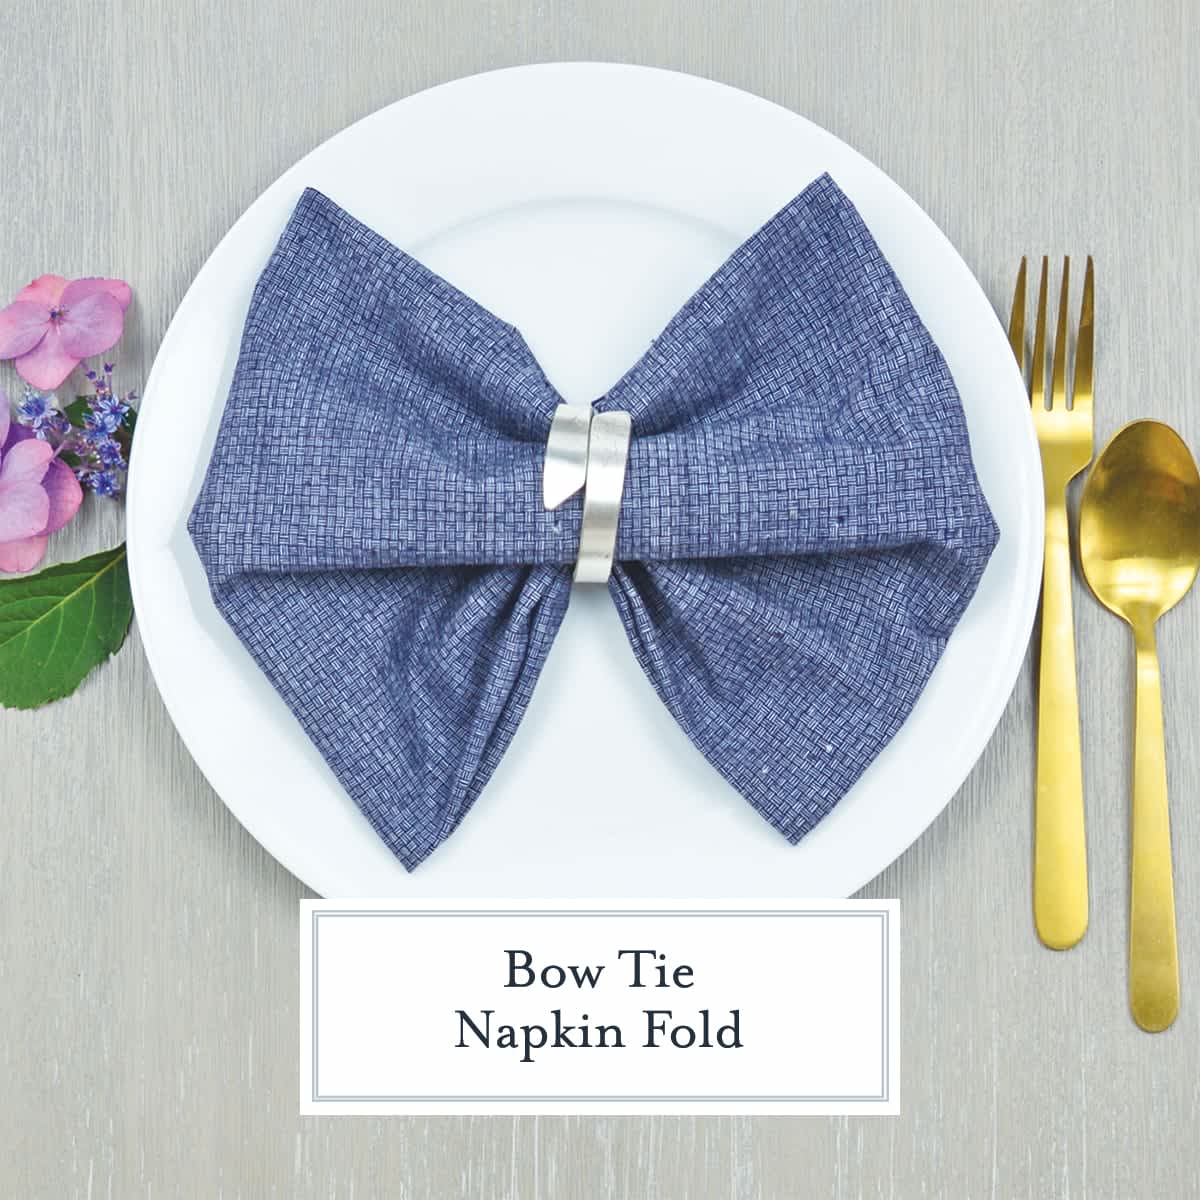 9 More Stylish Napkin Folding Ideas To Impress Your Guests - RMBO Collective